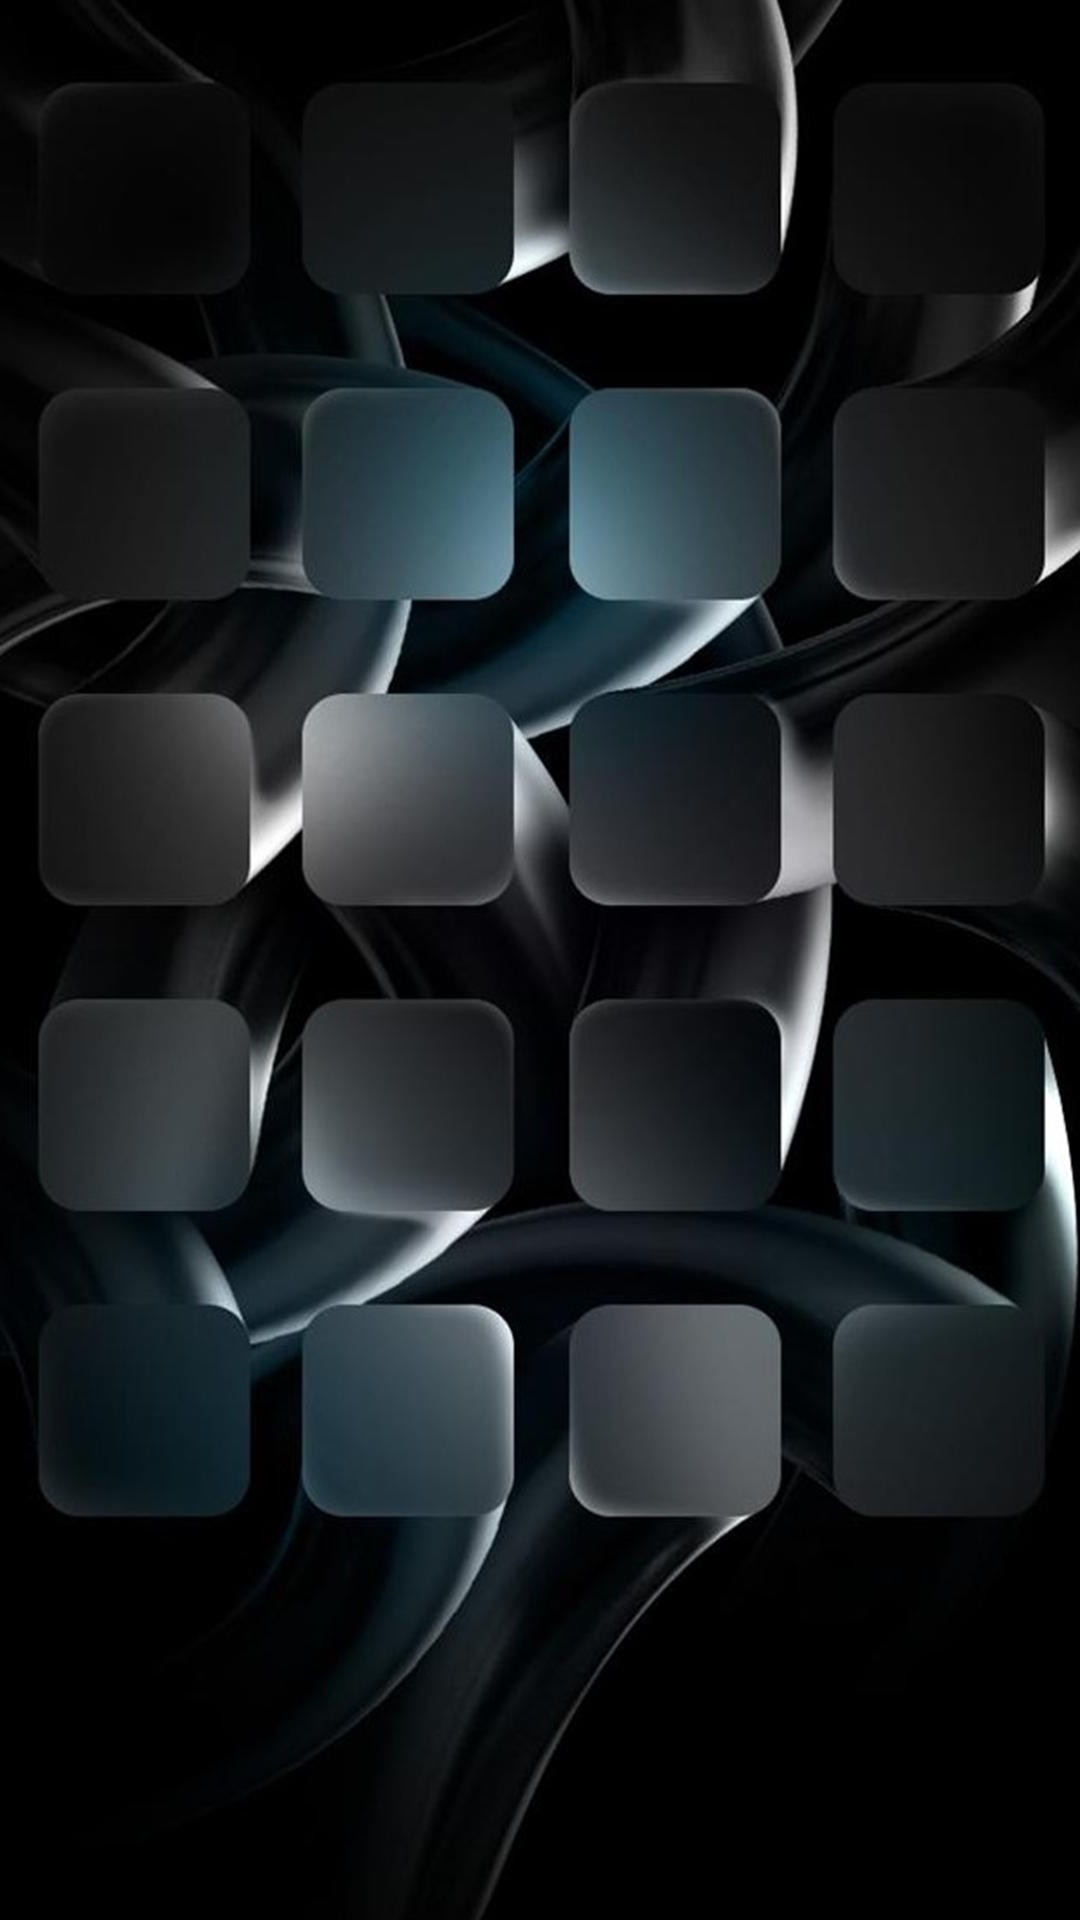 1080x1920 Free Abstract Phone Wallpapers Download HD.